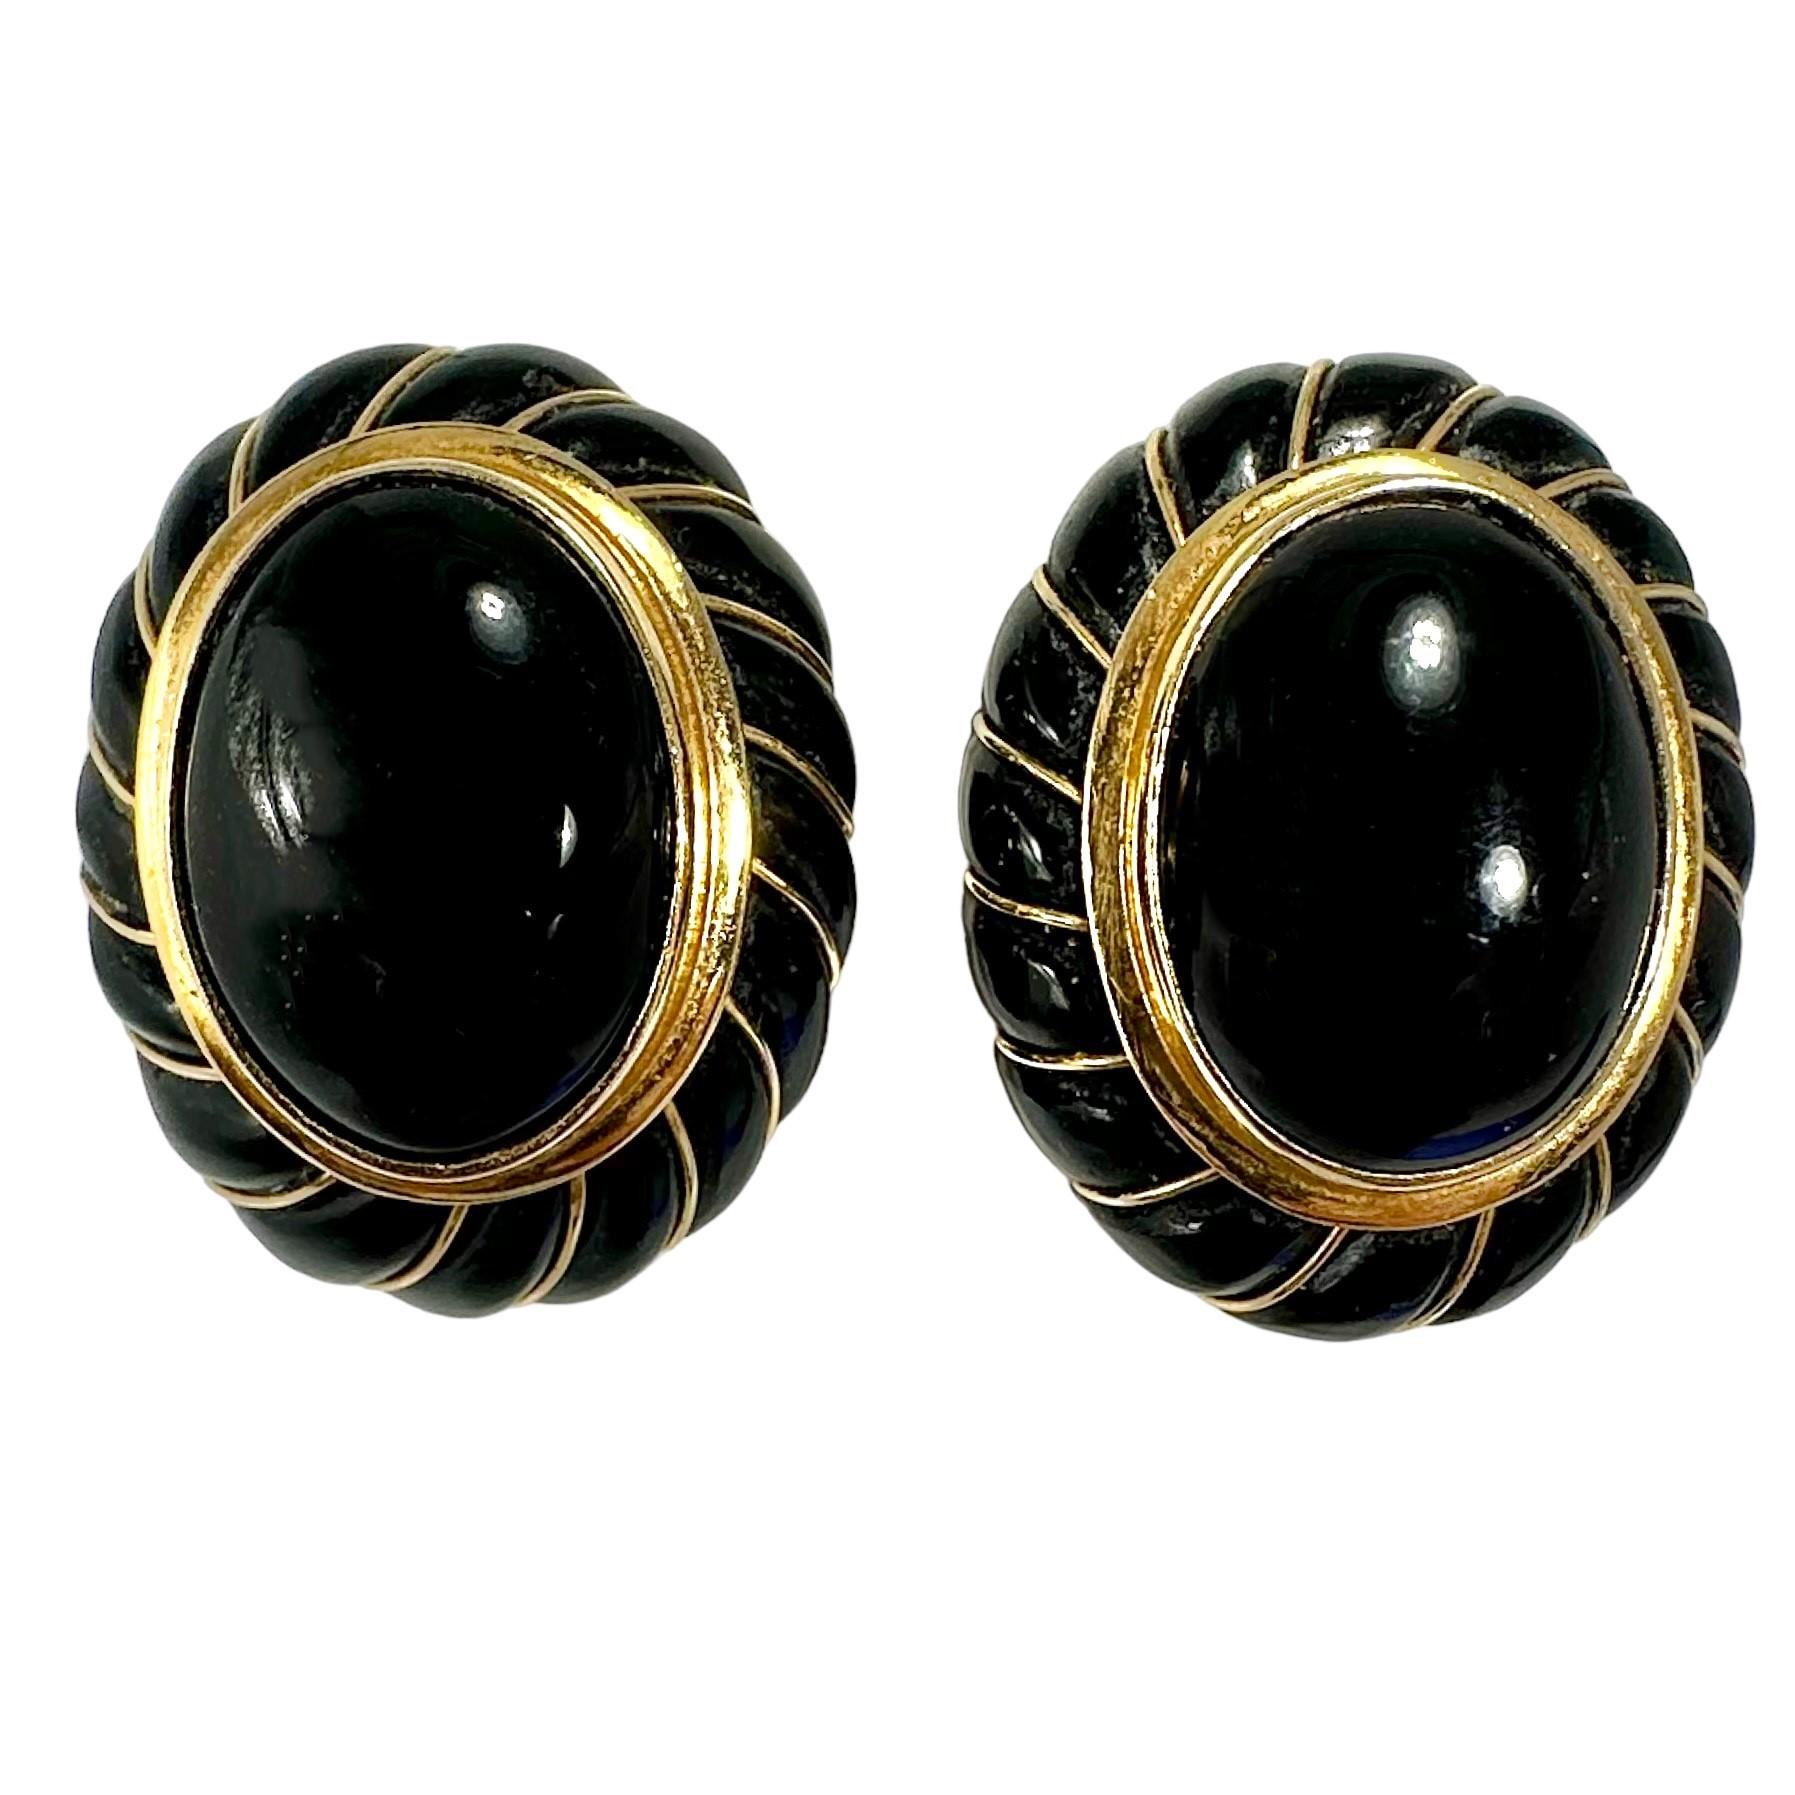 This highly detailed pair of onyx and gold earrings by MAZ are ideal for daytime wear. At 1 inch long by 3/4 inch wide, they are mid-sized, not too large and not too small. A bezel set onyx cabochon measuring 5/8 inch by 1 /2 inch is the